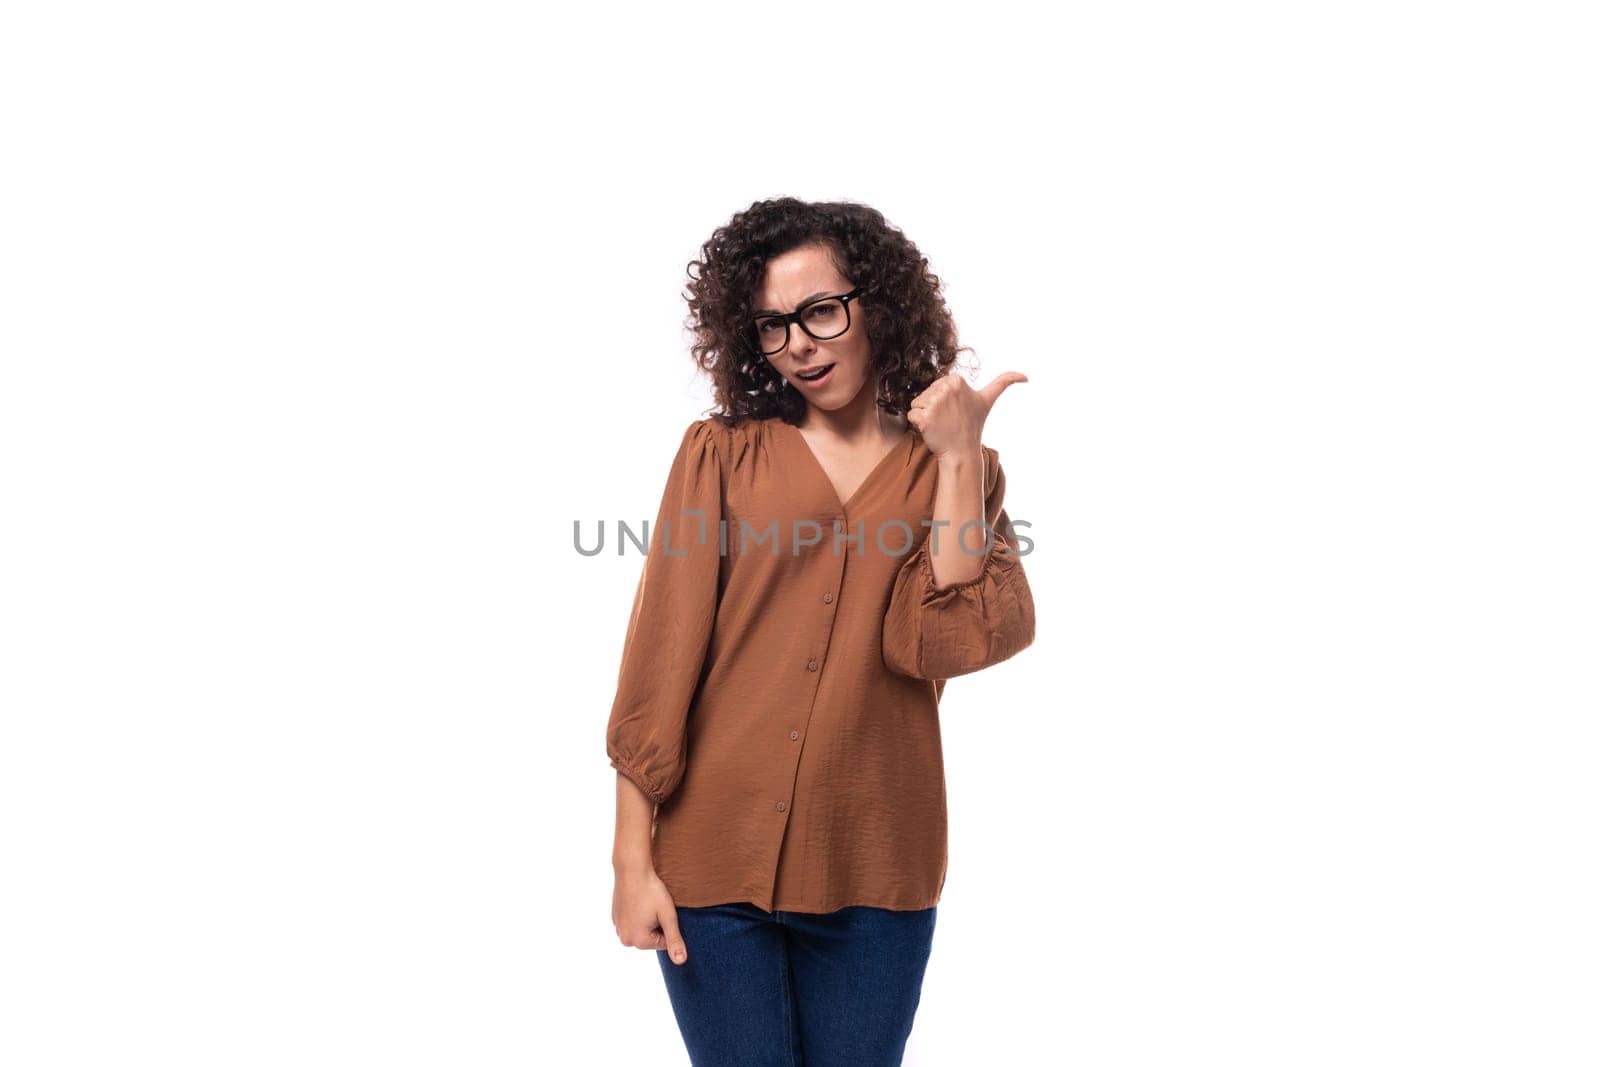 portrait of a young stylish slim brunette woman with curly hair dressed in a brown shirt.